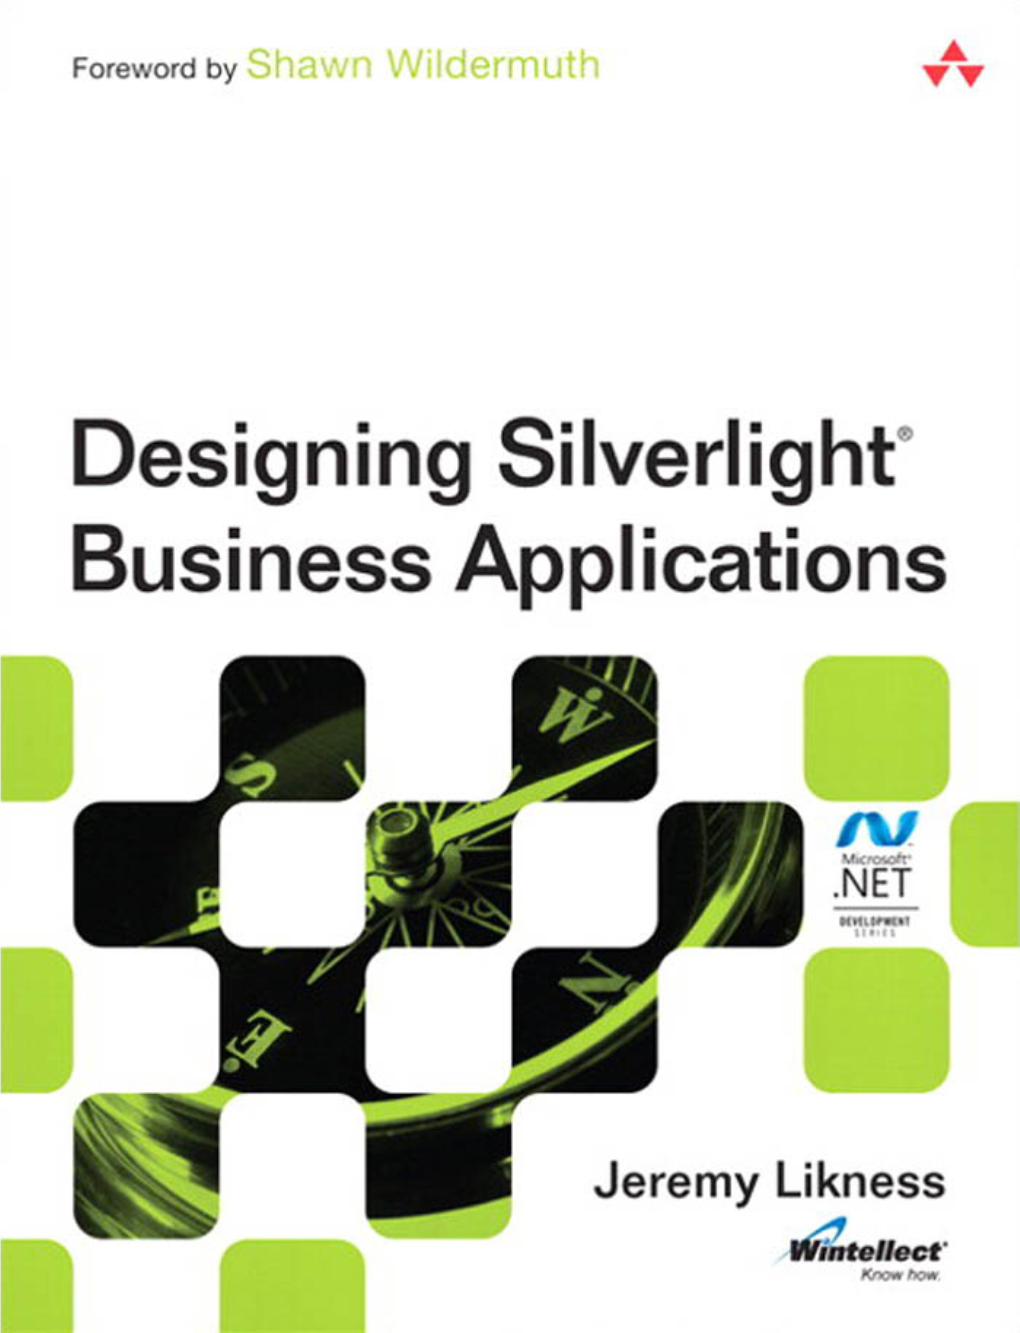 Designing Silverlight® Business Applications